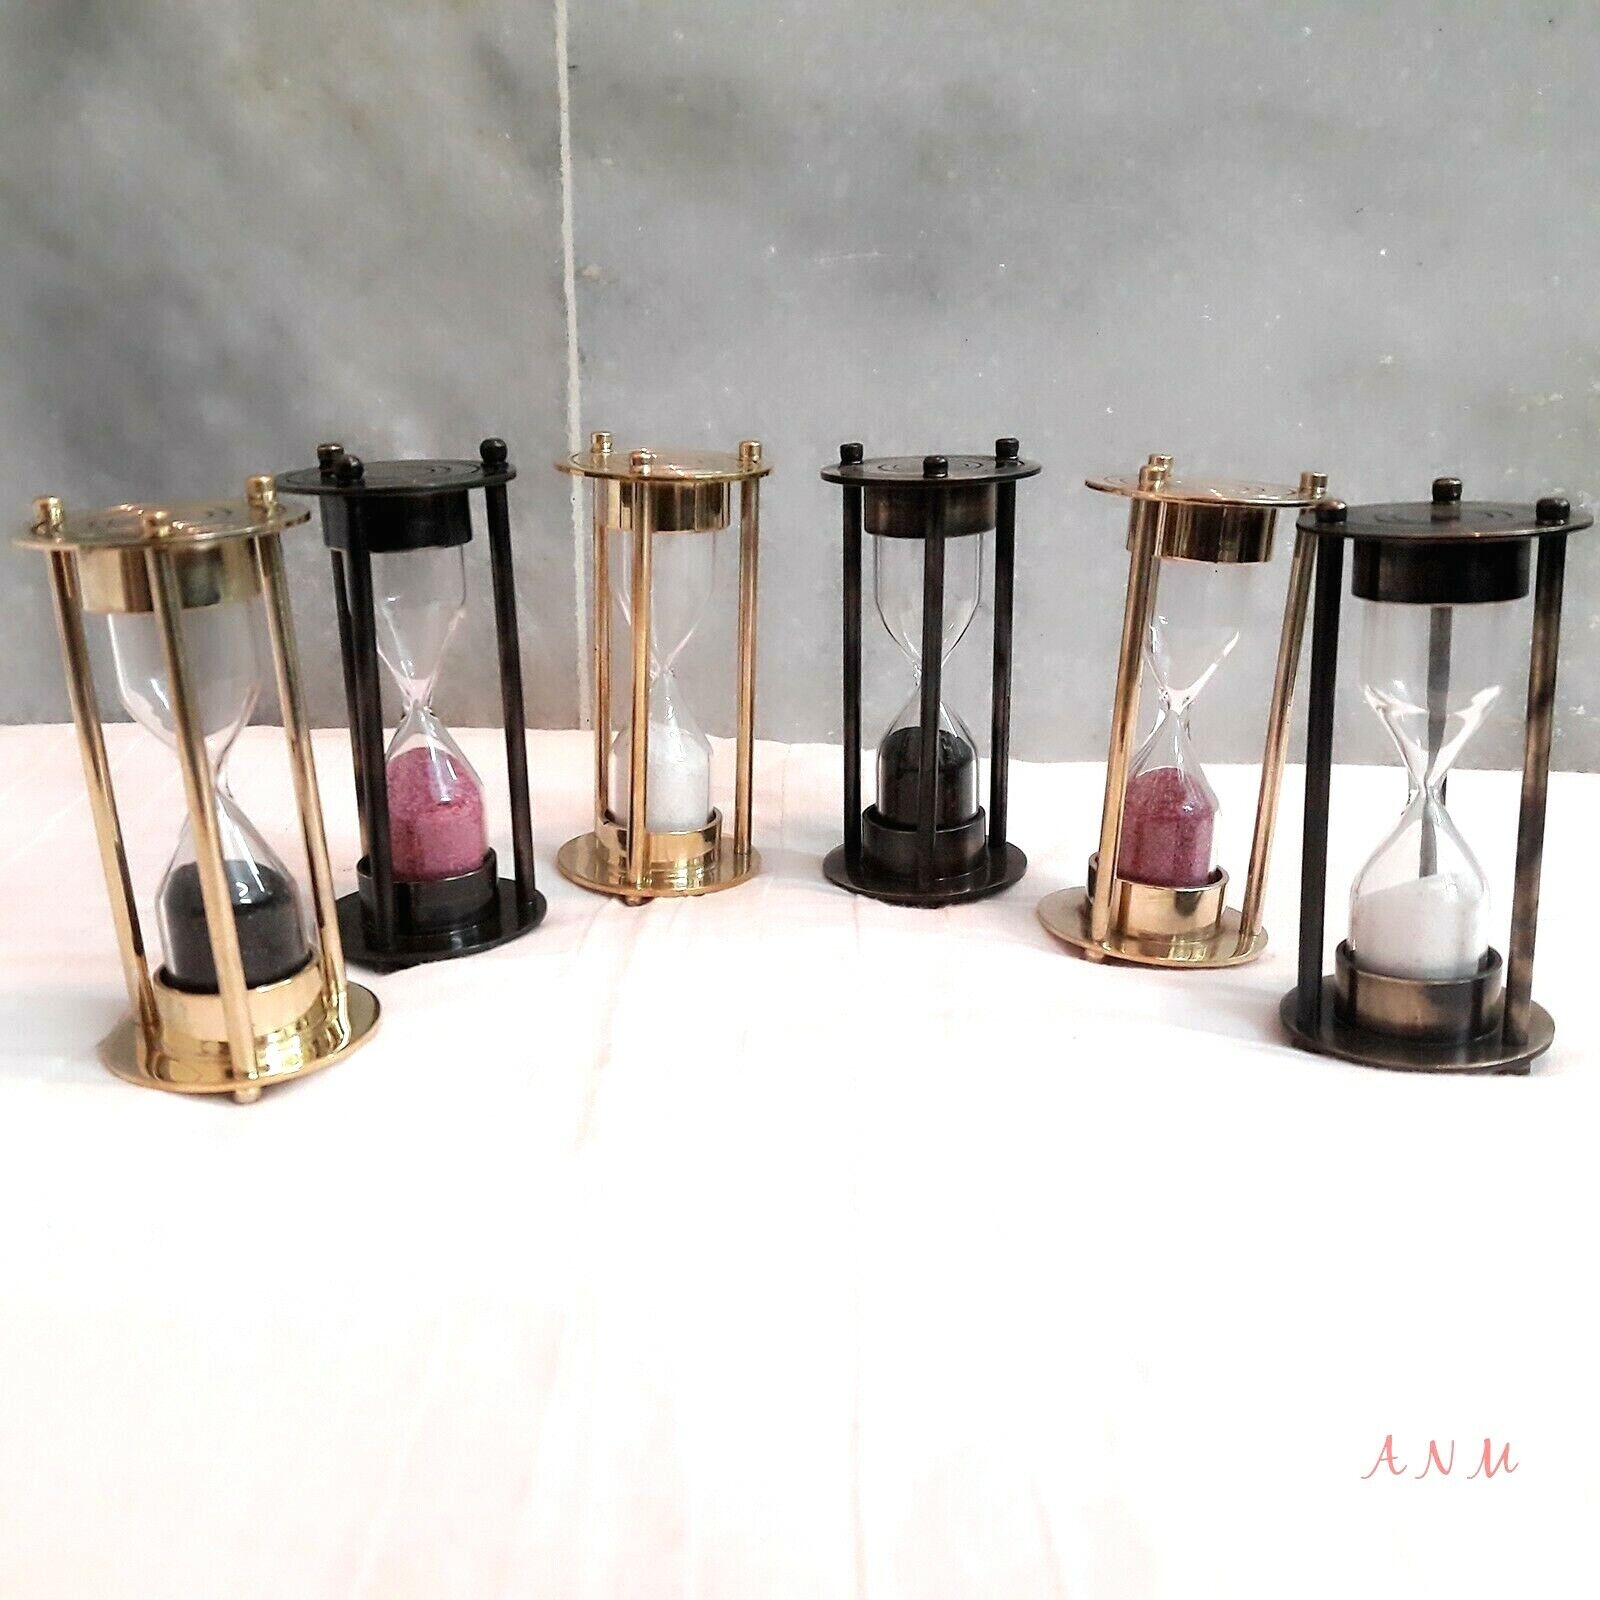 Lot of 6 Pcs Brass Sand Timer Antique Maritime Collectible Gift